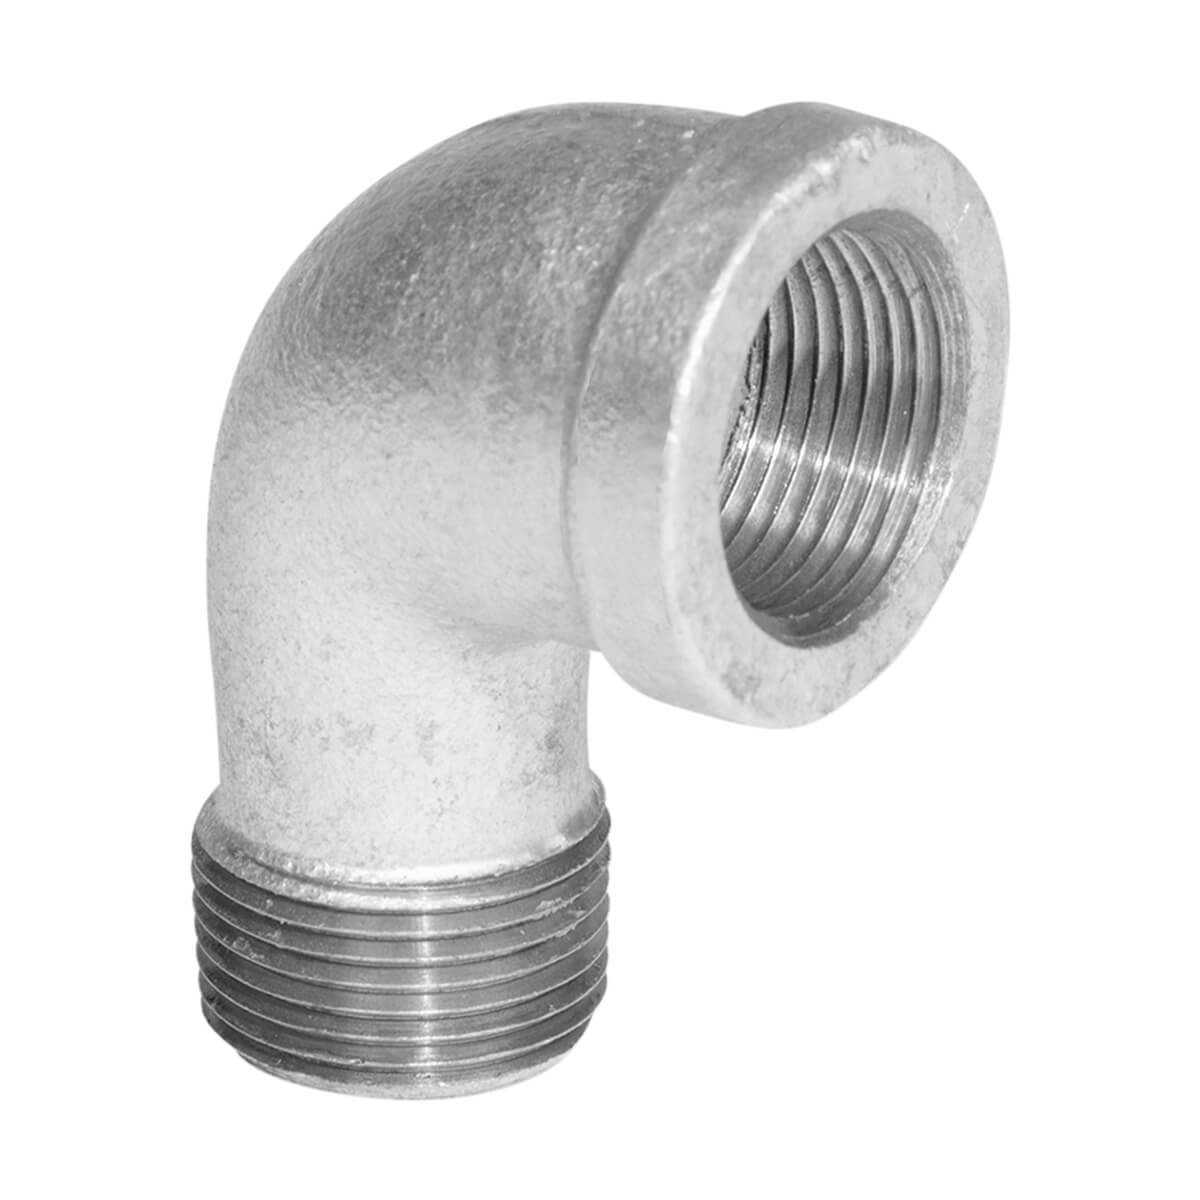 Fitting Galvanized Iron 90 ST Elbow - 3/4-in